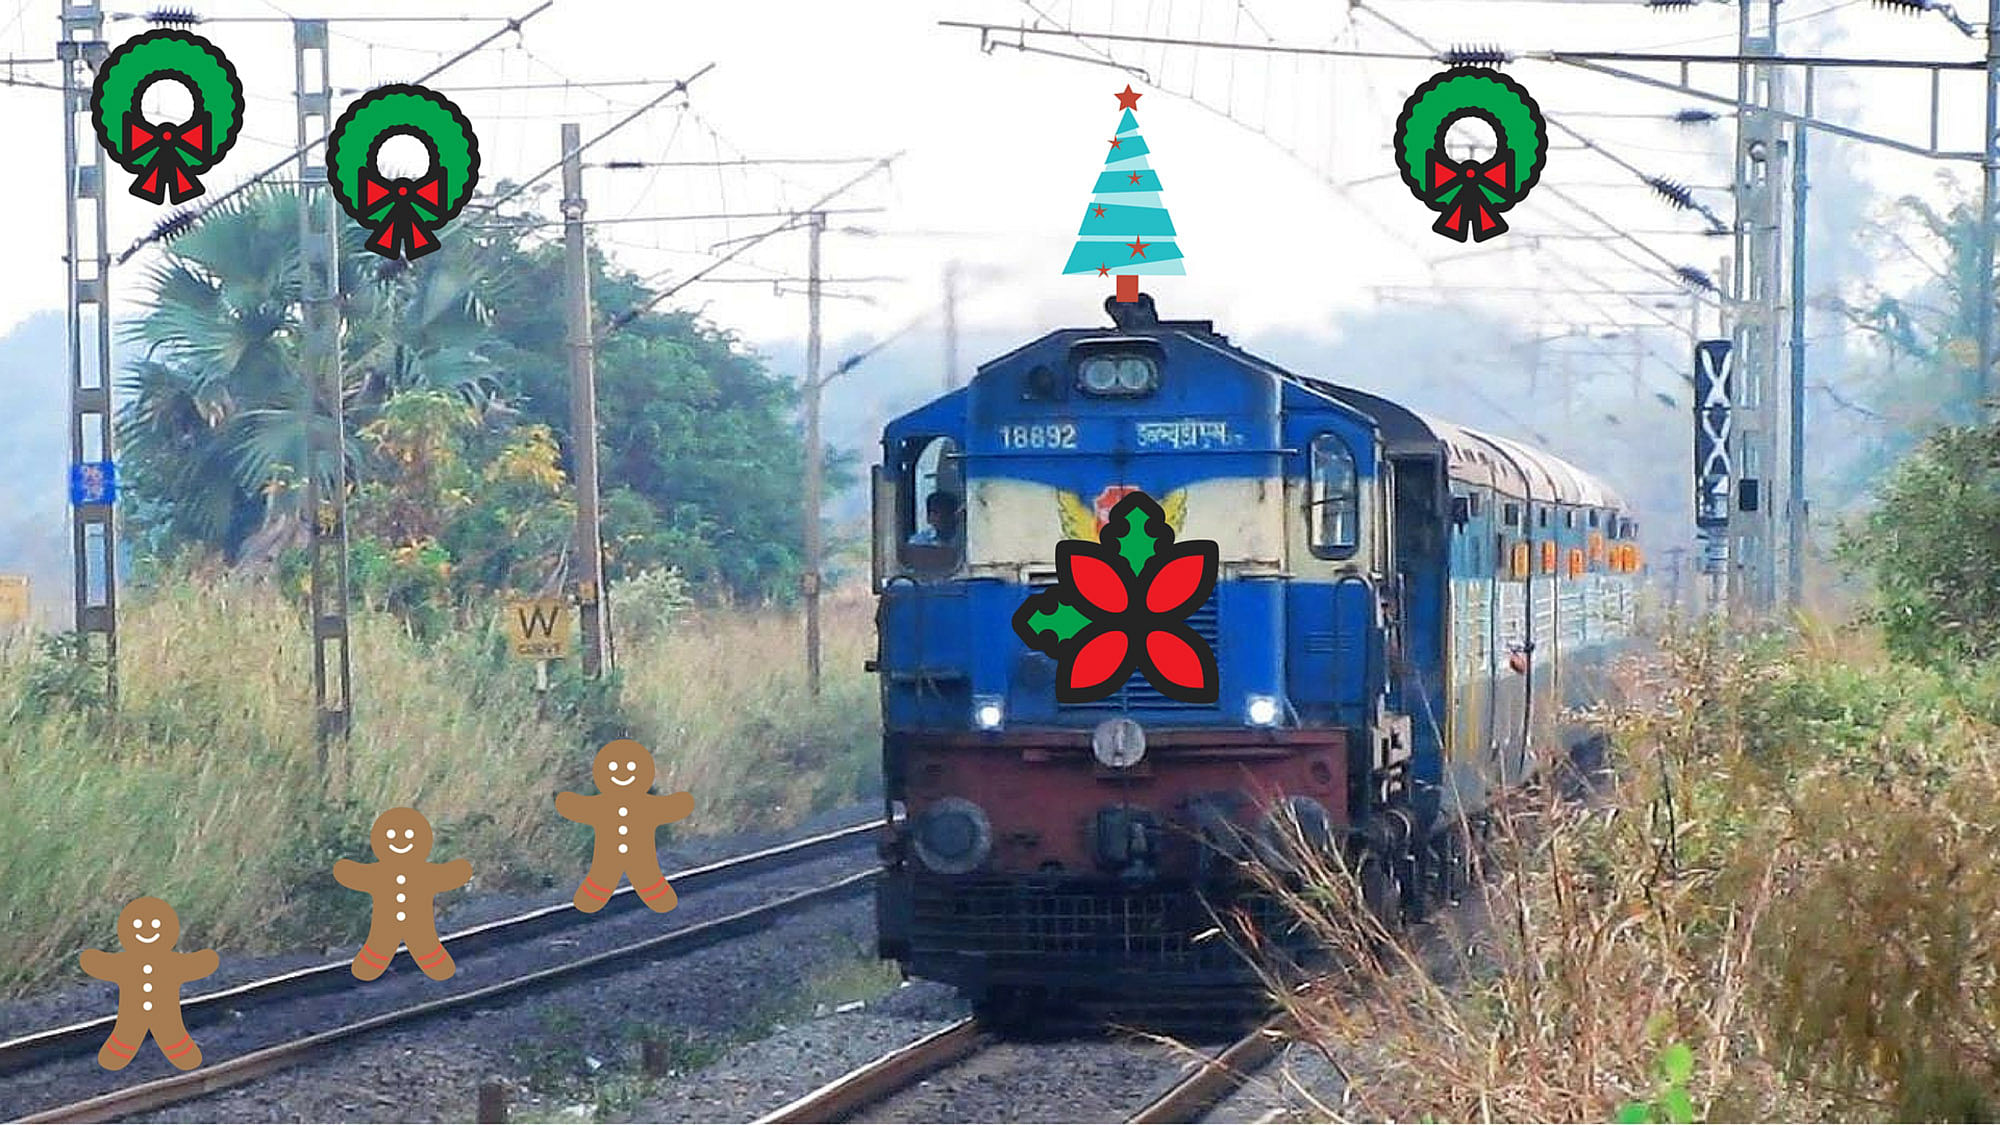 Indian Railways Trivandrum division gears up to wish you a ‘Merry Christmas’. (Photo: <a href="https://www.facebook.com/photo.php?fbid=10203191706143125&amp;set=o.609346569121950&amp;type=1&amp;theater">Facebook</a>)